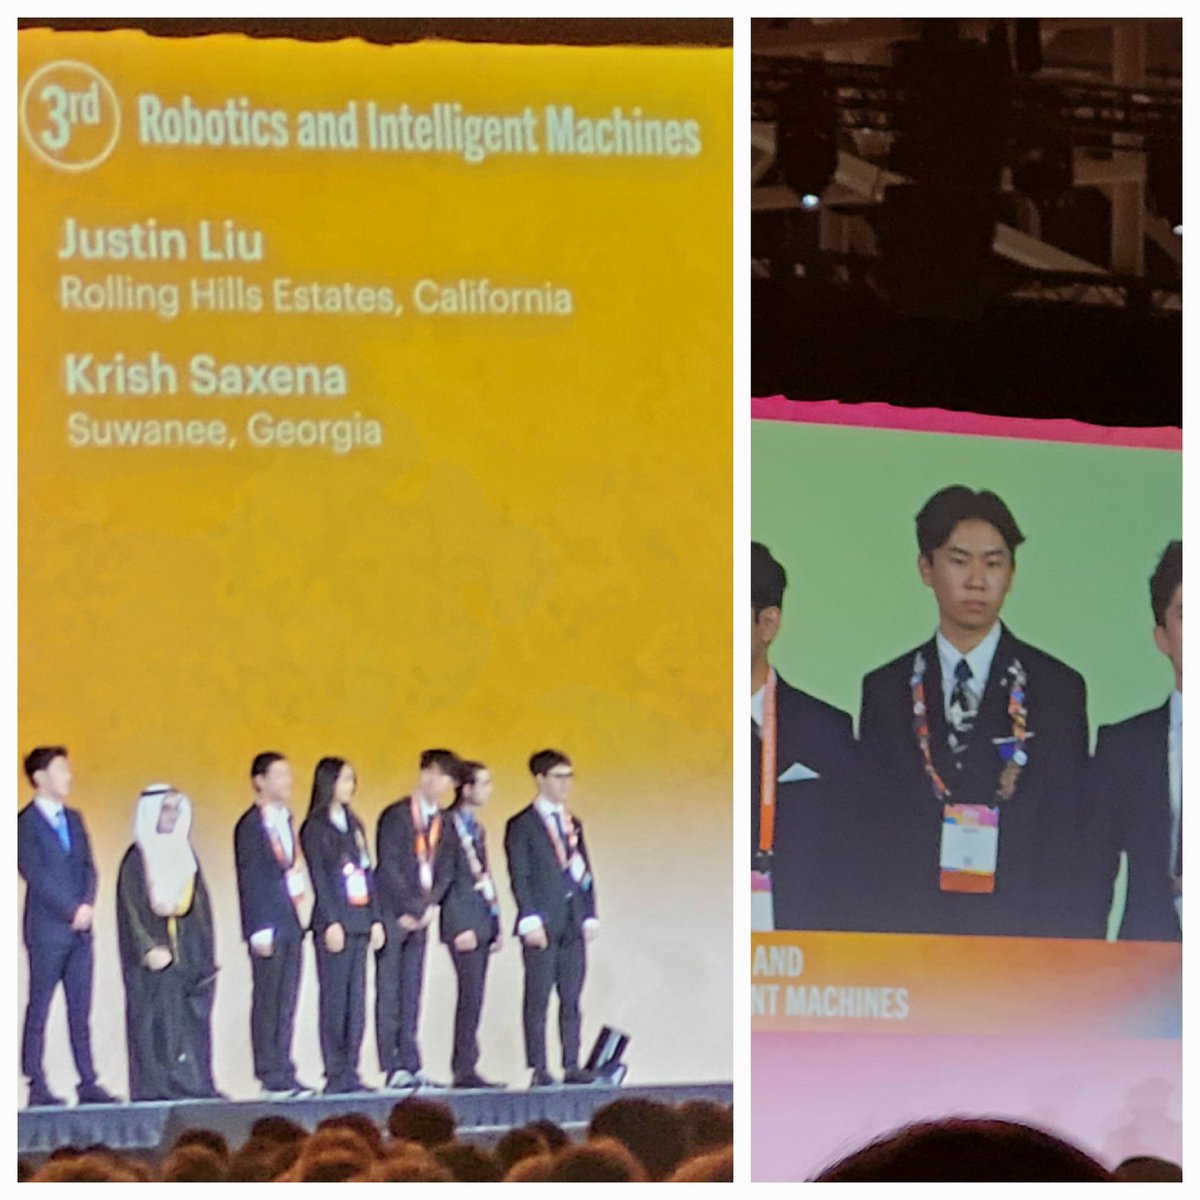 A huge congratulations to Justin Liu for winning 3rd place in Robotics and Intelligent Machines at the 2023 International Science and Engineering Fair! #RegeneronISEF